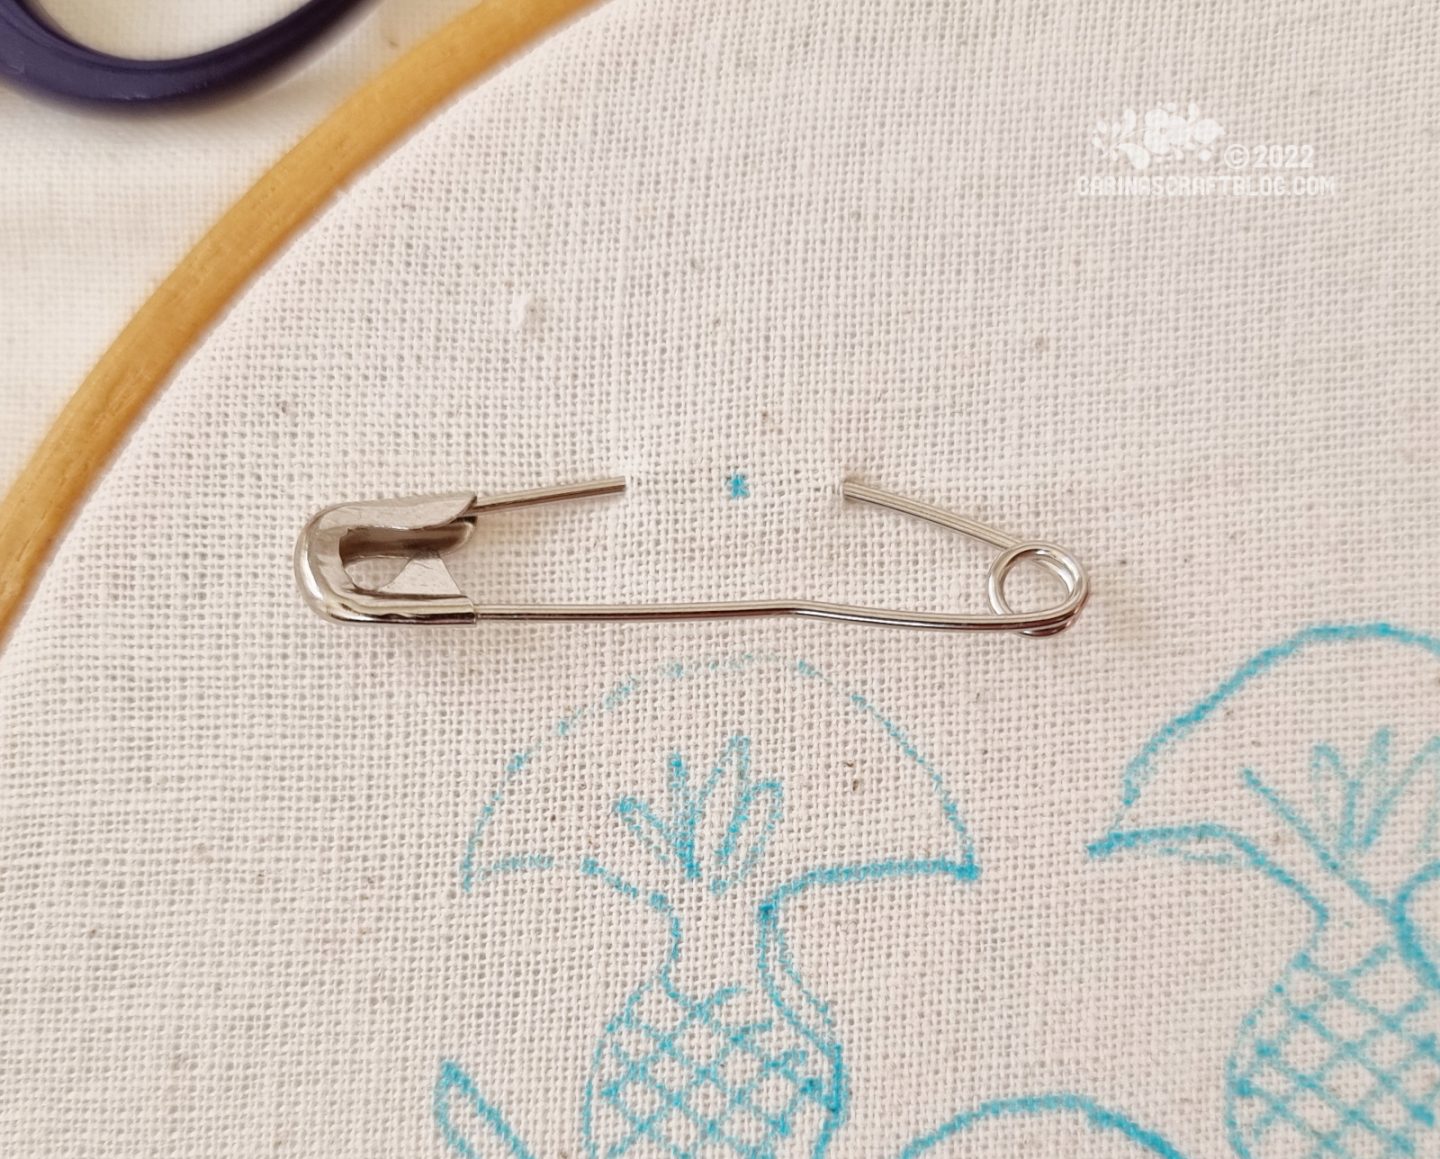 Pin on embroidery